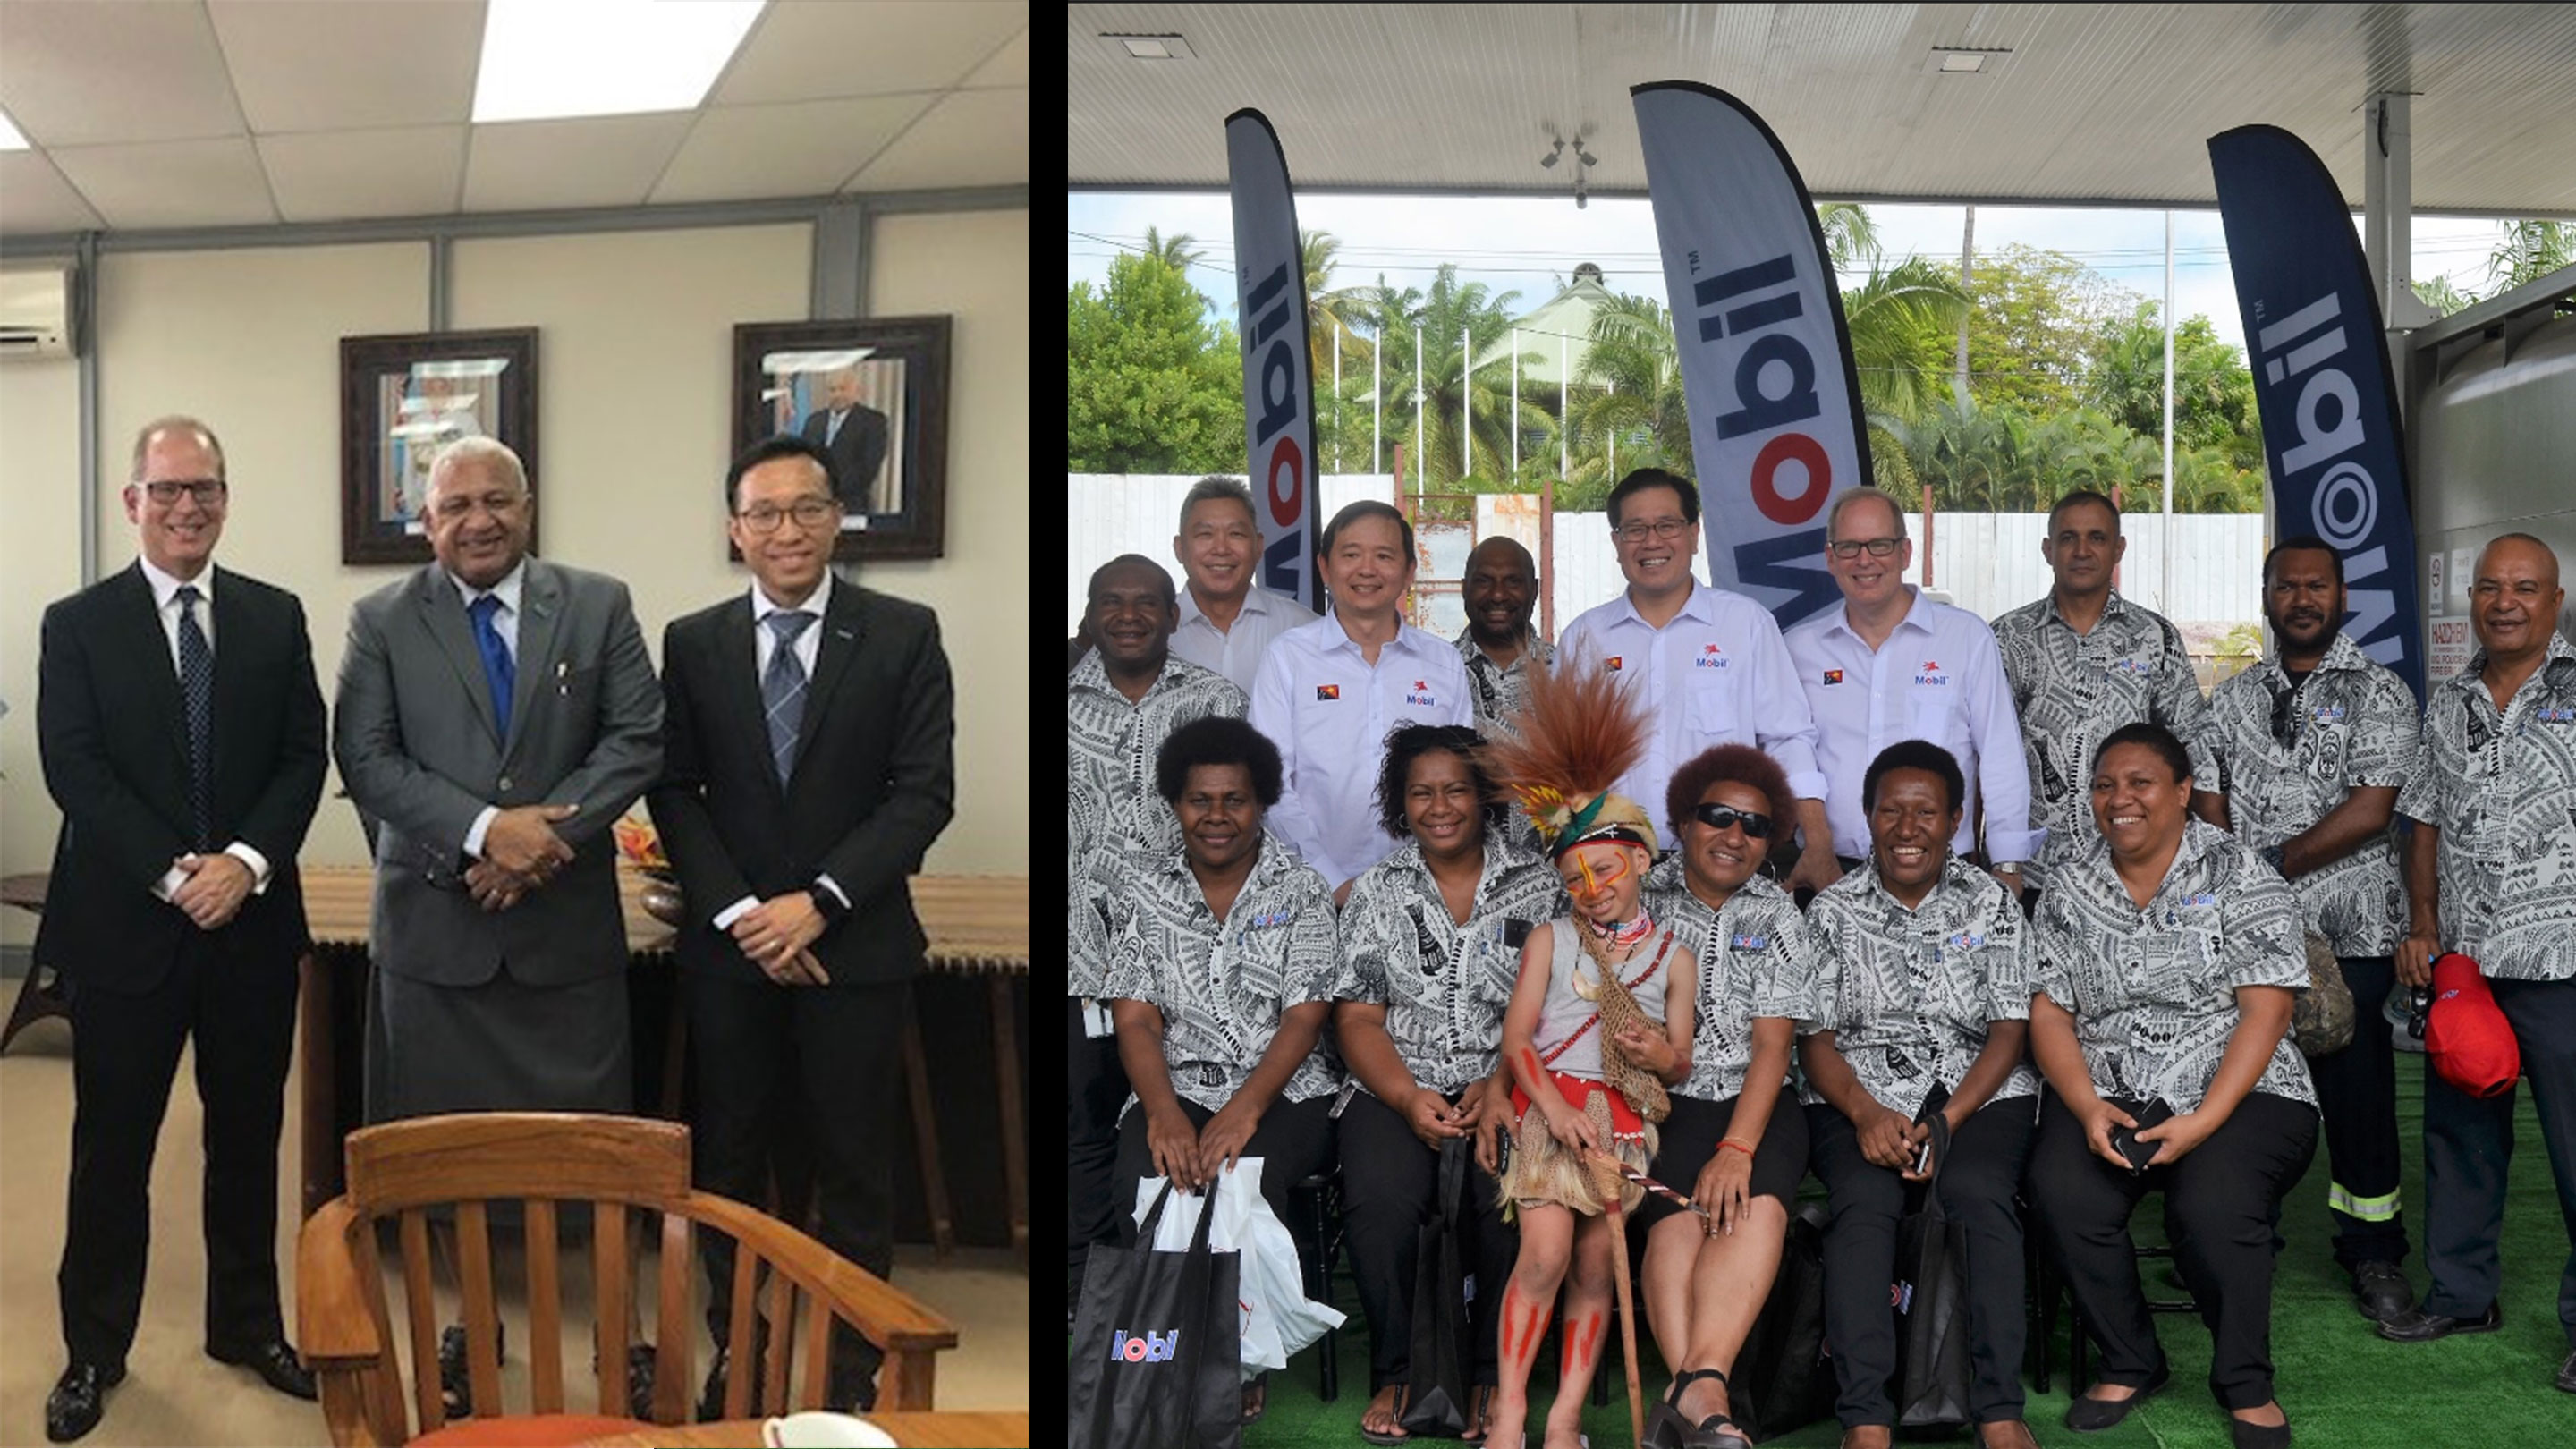 Image As Executive Director and Fuels Manager of the South Pacific region, Bruce oversees the essential delivery of quality Mobil fuels to customers in Australia, Fiji, New Caledonia, New Zealand and Papua New Guinea.